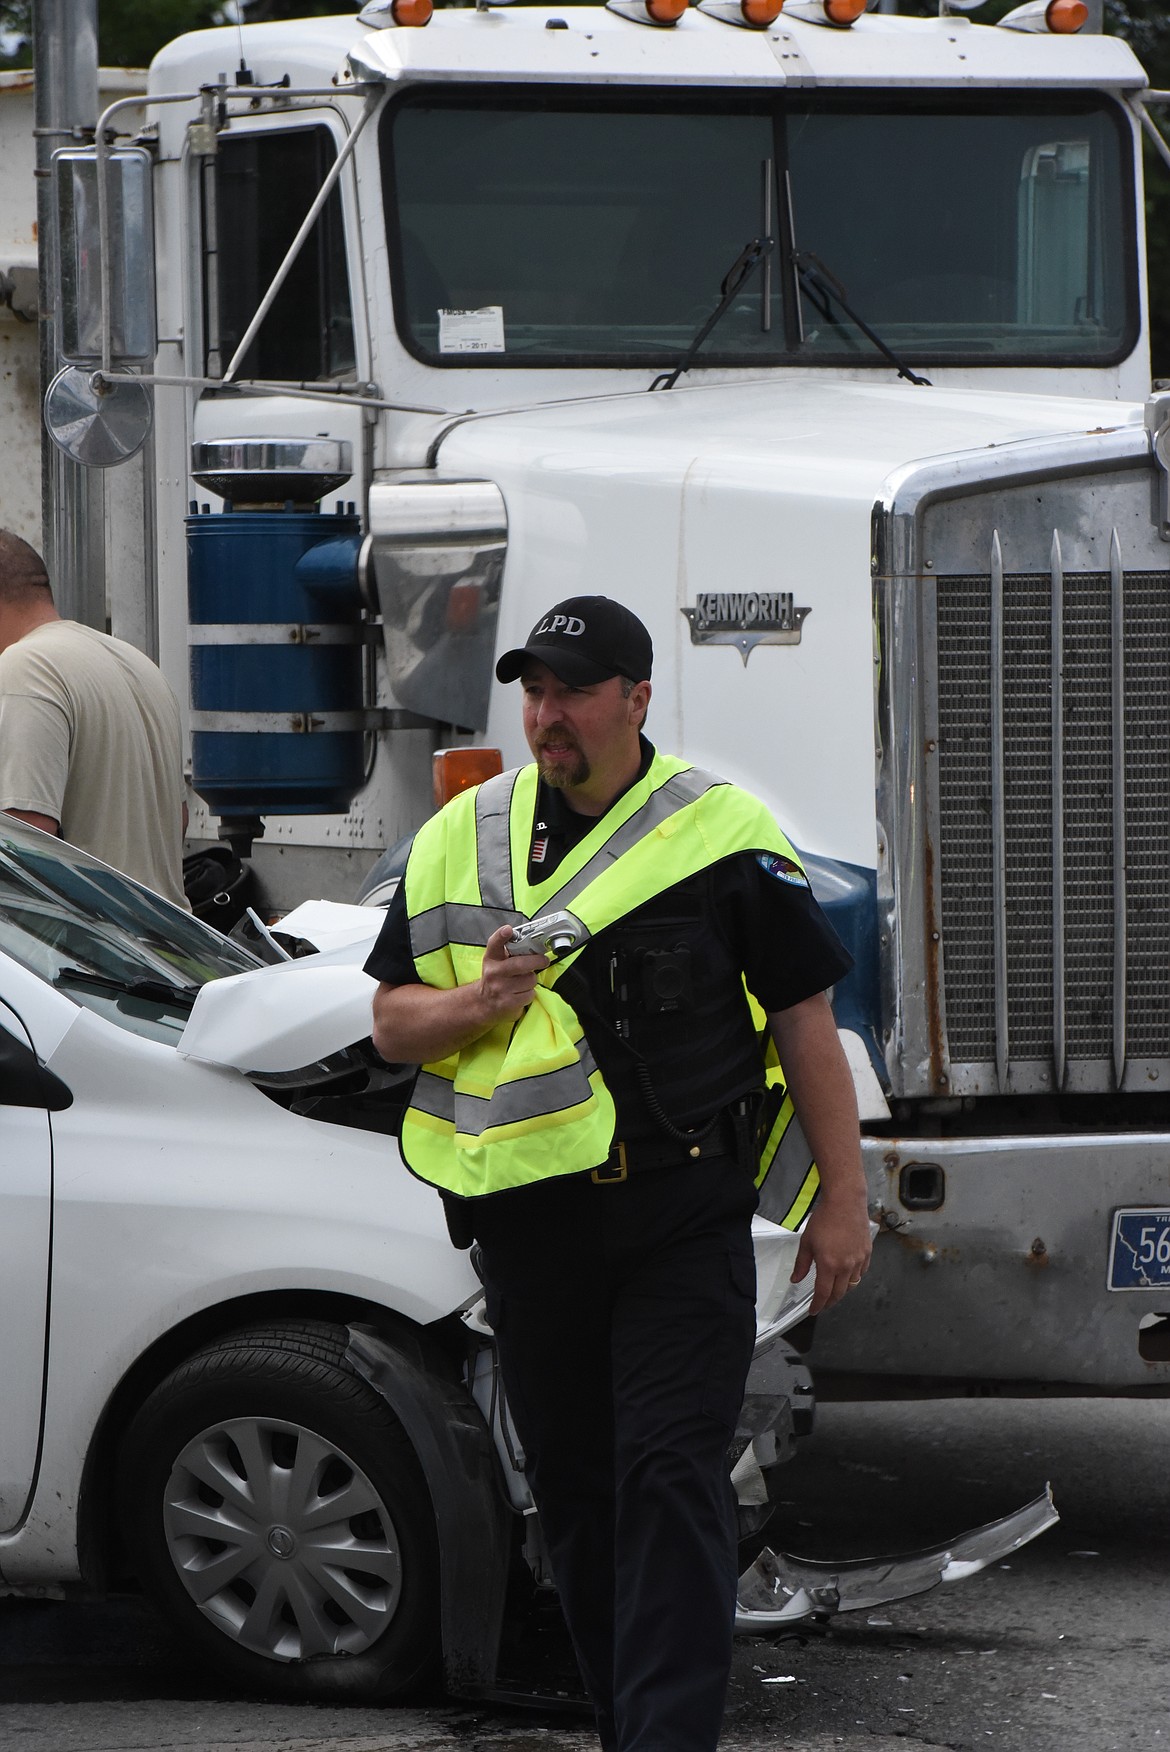 Libby Police officer Ronald Buckner at the scene of a traffic accident on June 8. (Derrick Perkins/The Western News)